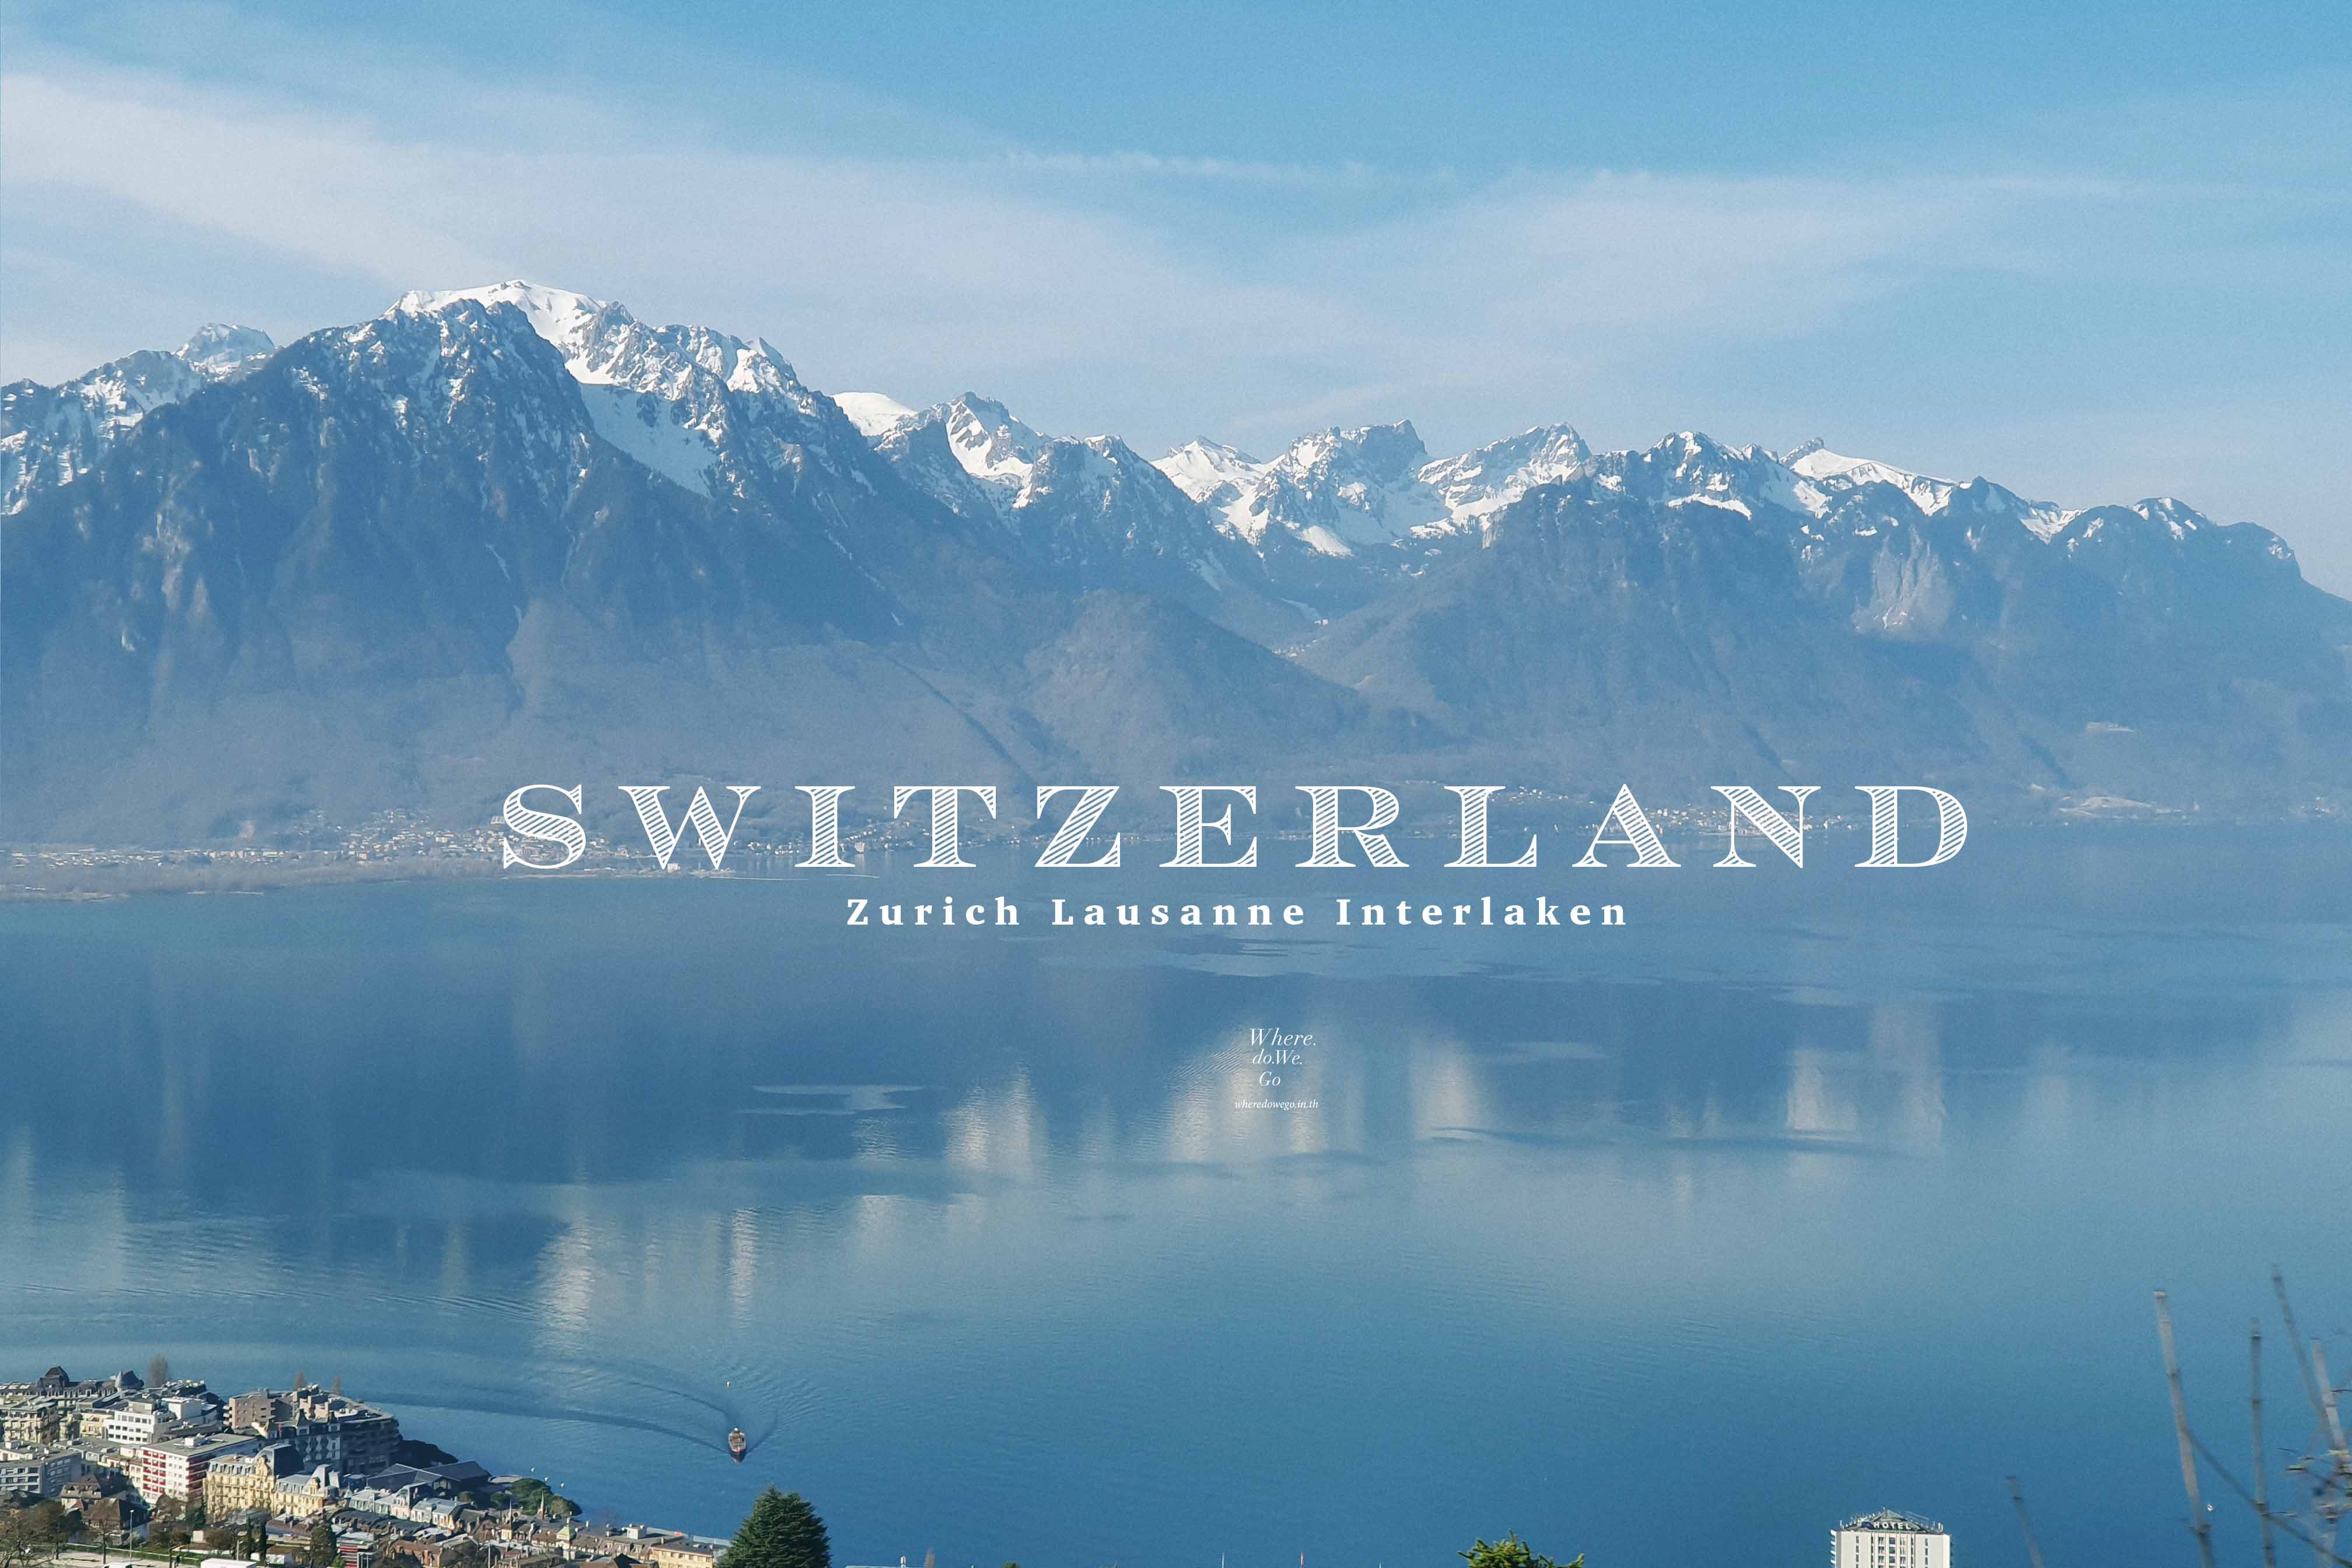 MINI Review : ‘SWITZERLAND’ IN THE FOOTSTEPS OF KING.